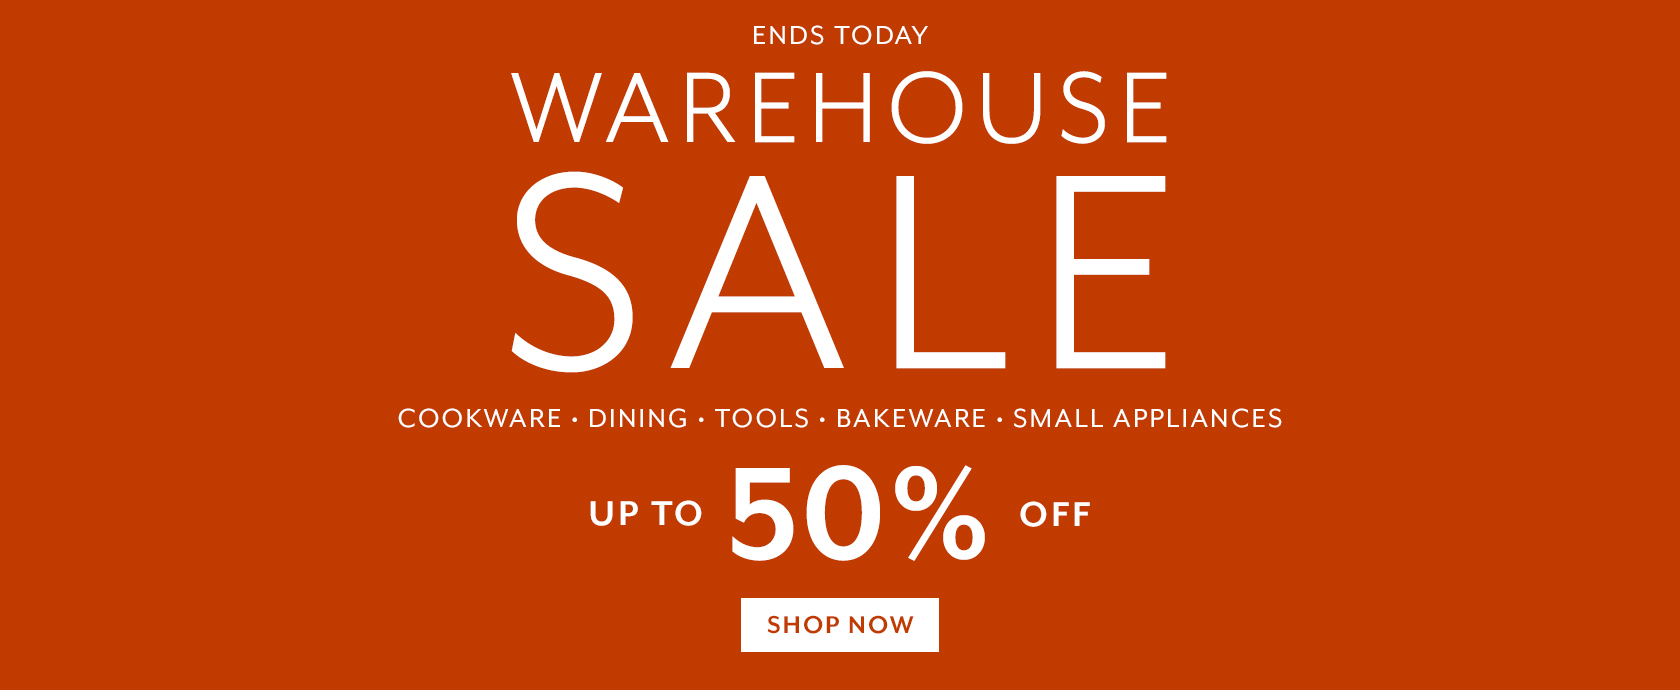 Ends Today Warehouse Sale up to 50% off cookware, dining, tools, bakeware, small appliances. Shop Now.